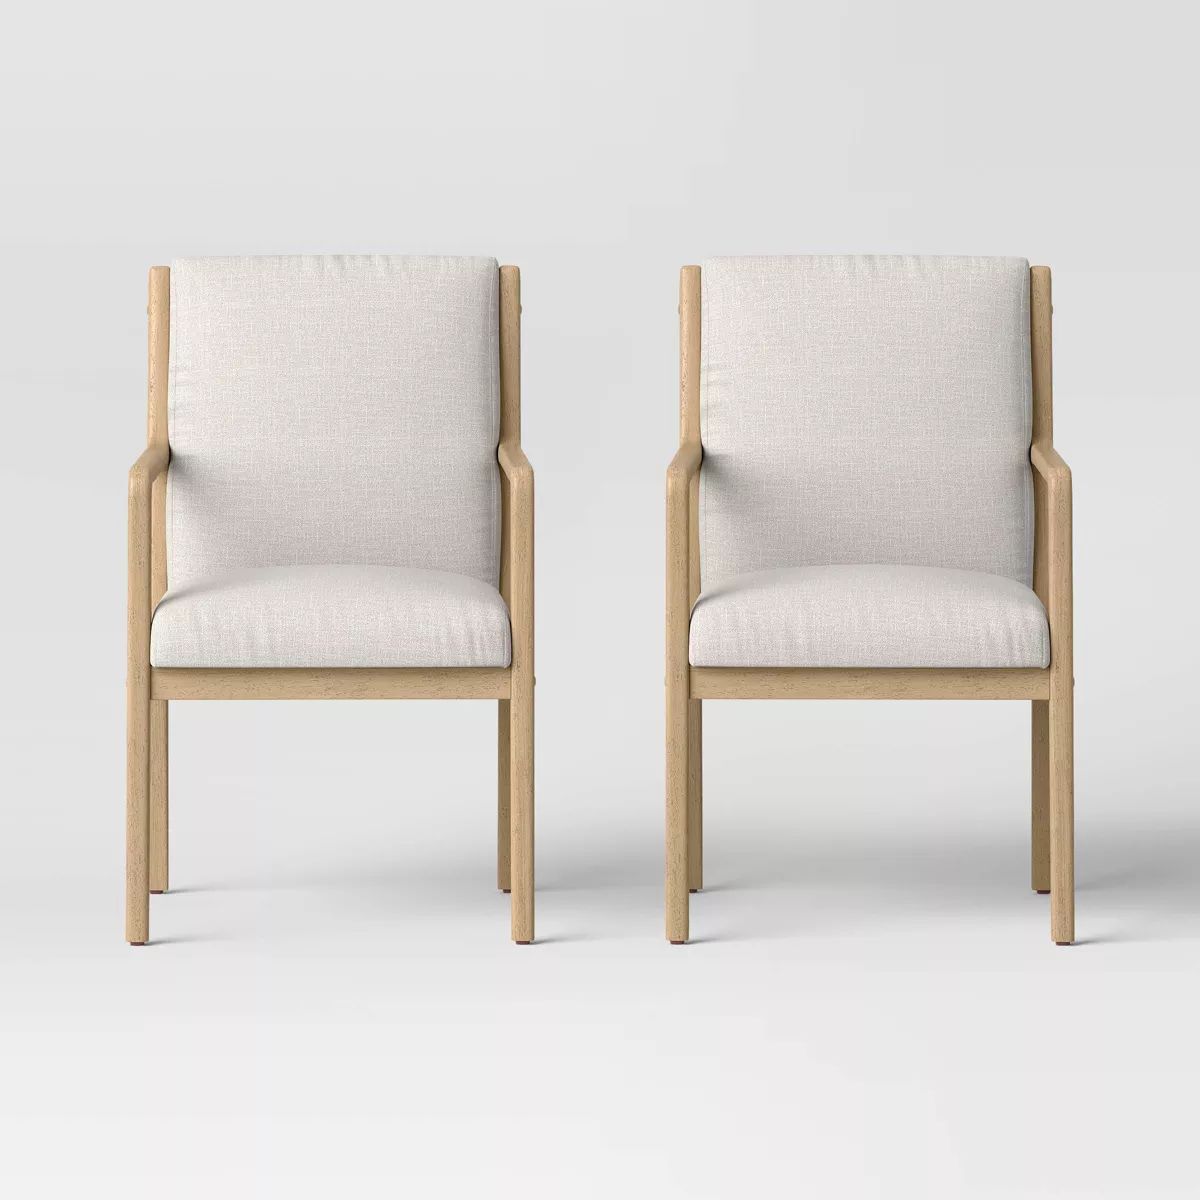 Esters Wood Arm Dining Chair Cream/Natural Wood - Threshold™ | Target